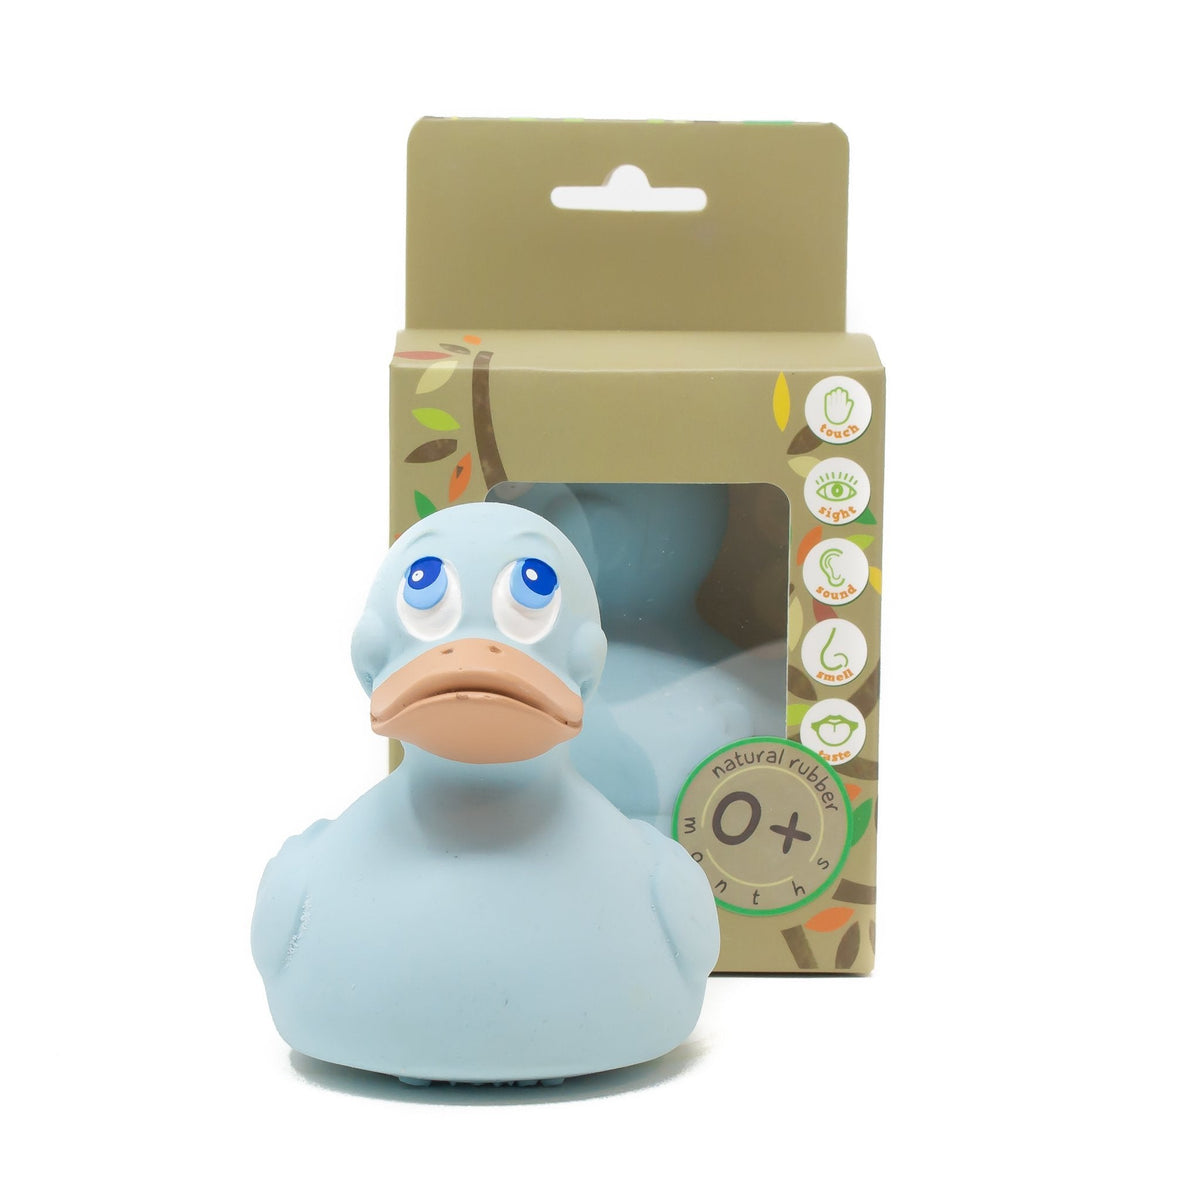 Buy Blue Duck Bath Toy by Lanco Online – Mushroom & Co - Natural Rubber Toys